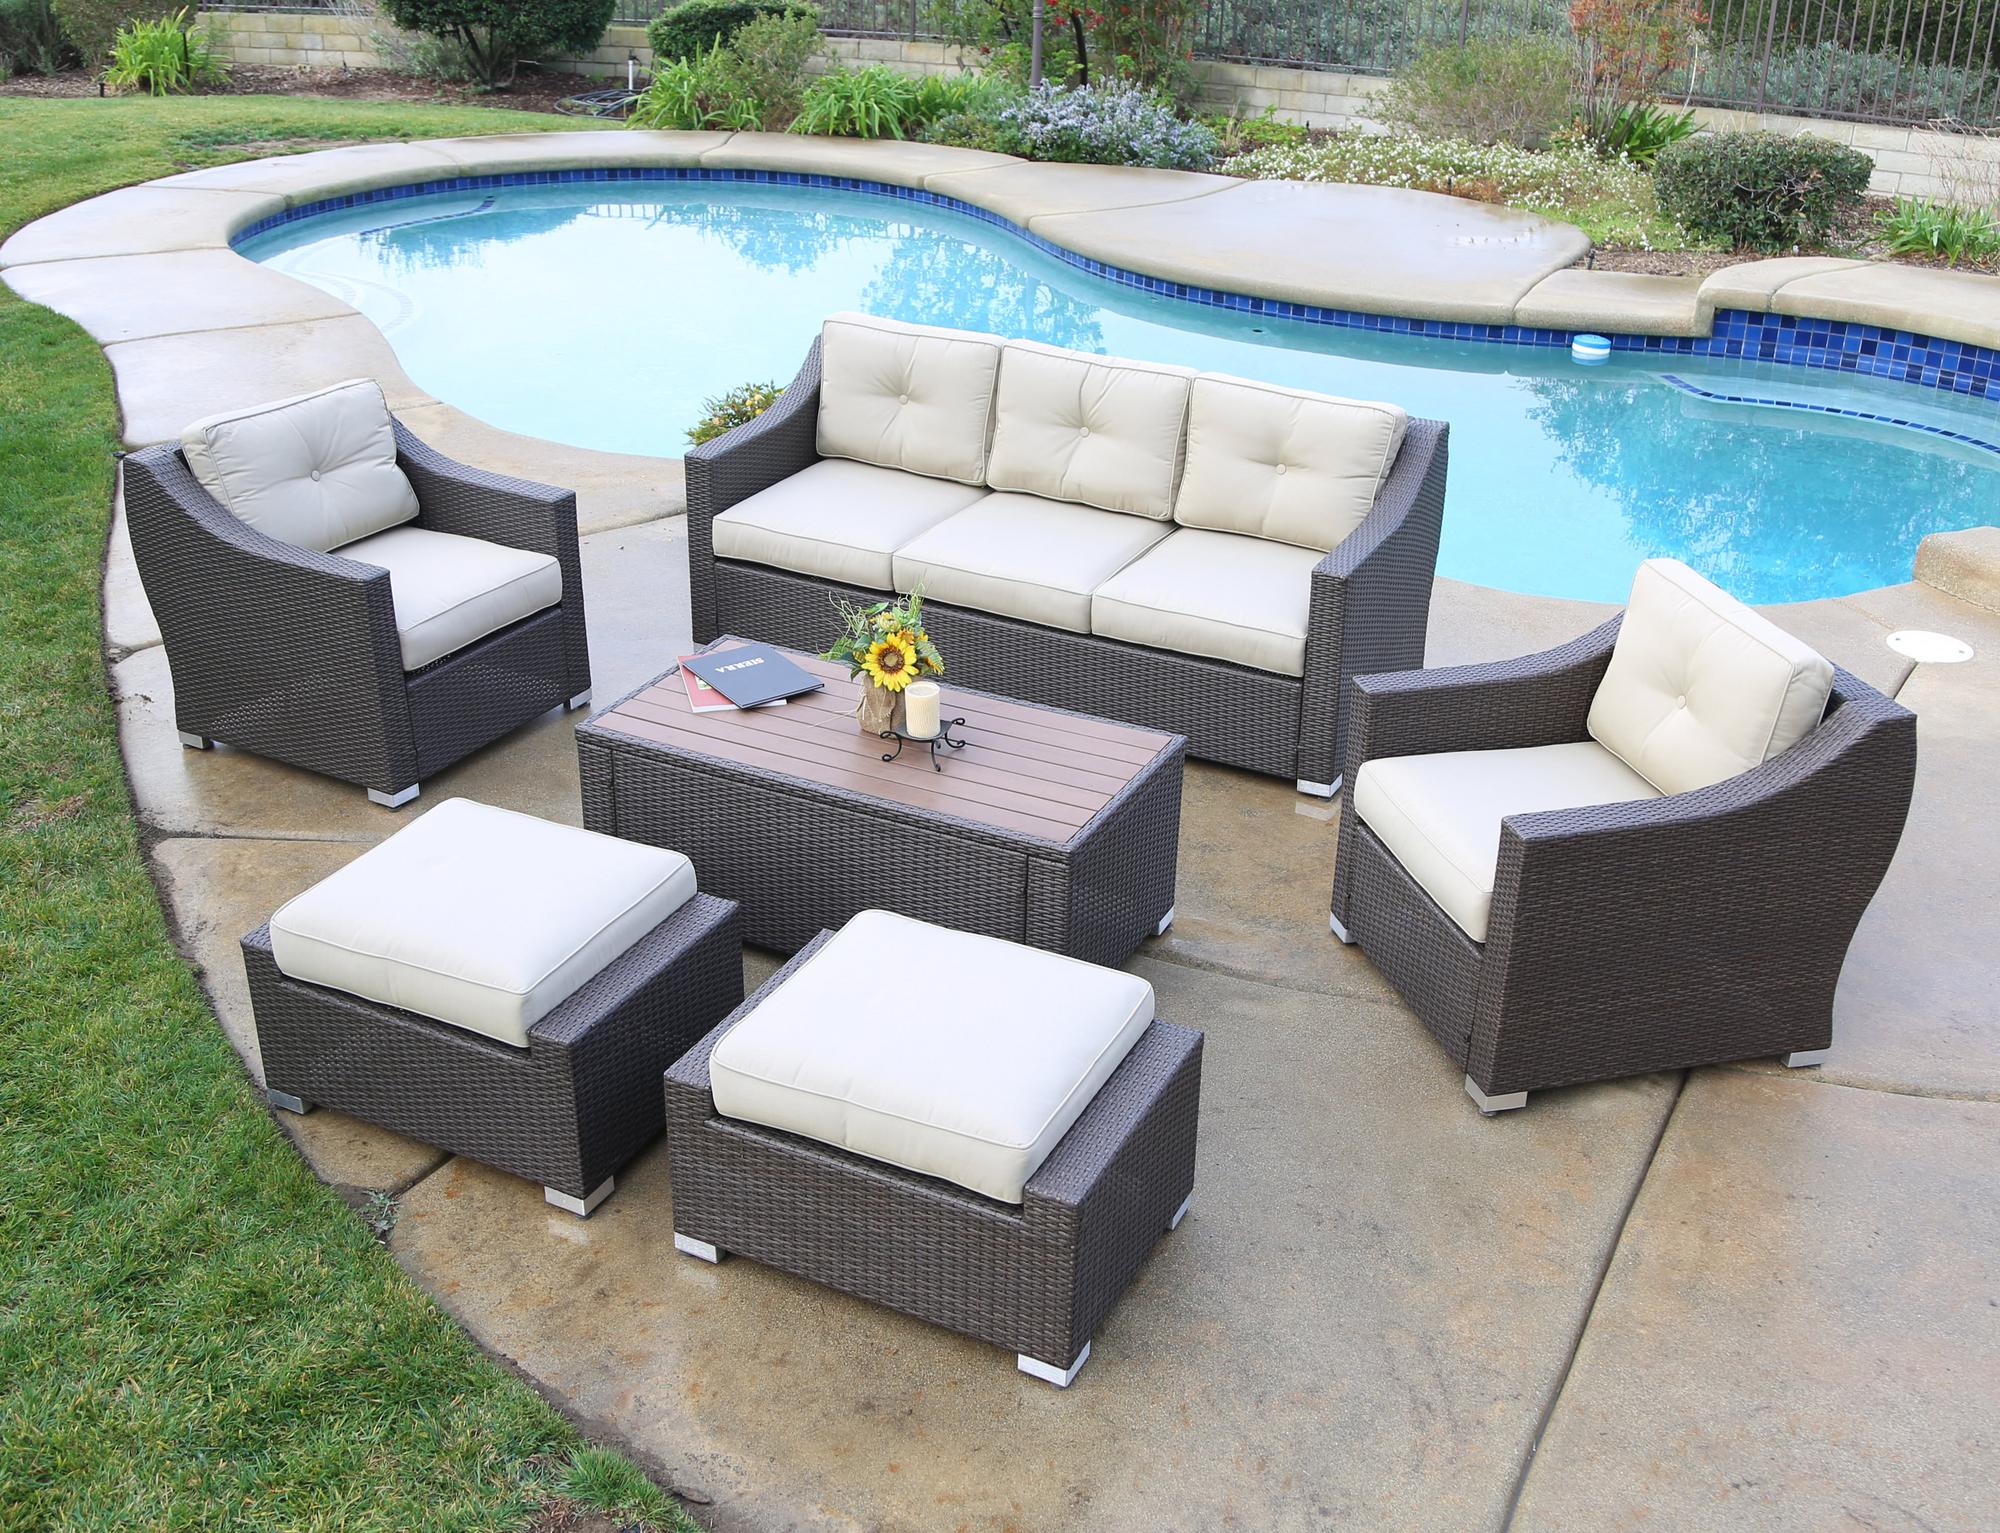 Sb-3775ds-5 6 Piece South Beach Wicker Patio Deep Seating Group With Cushion